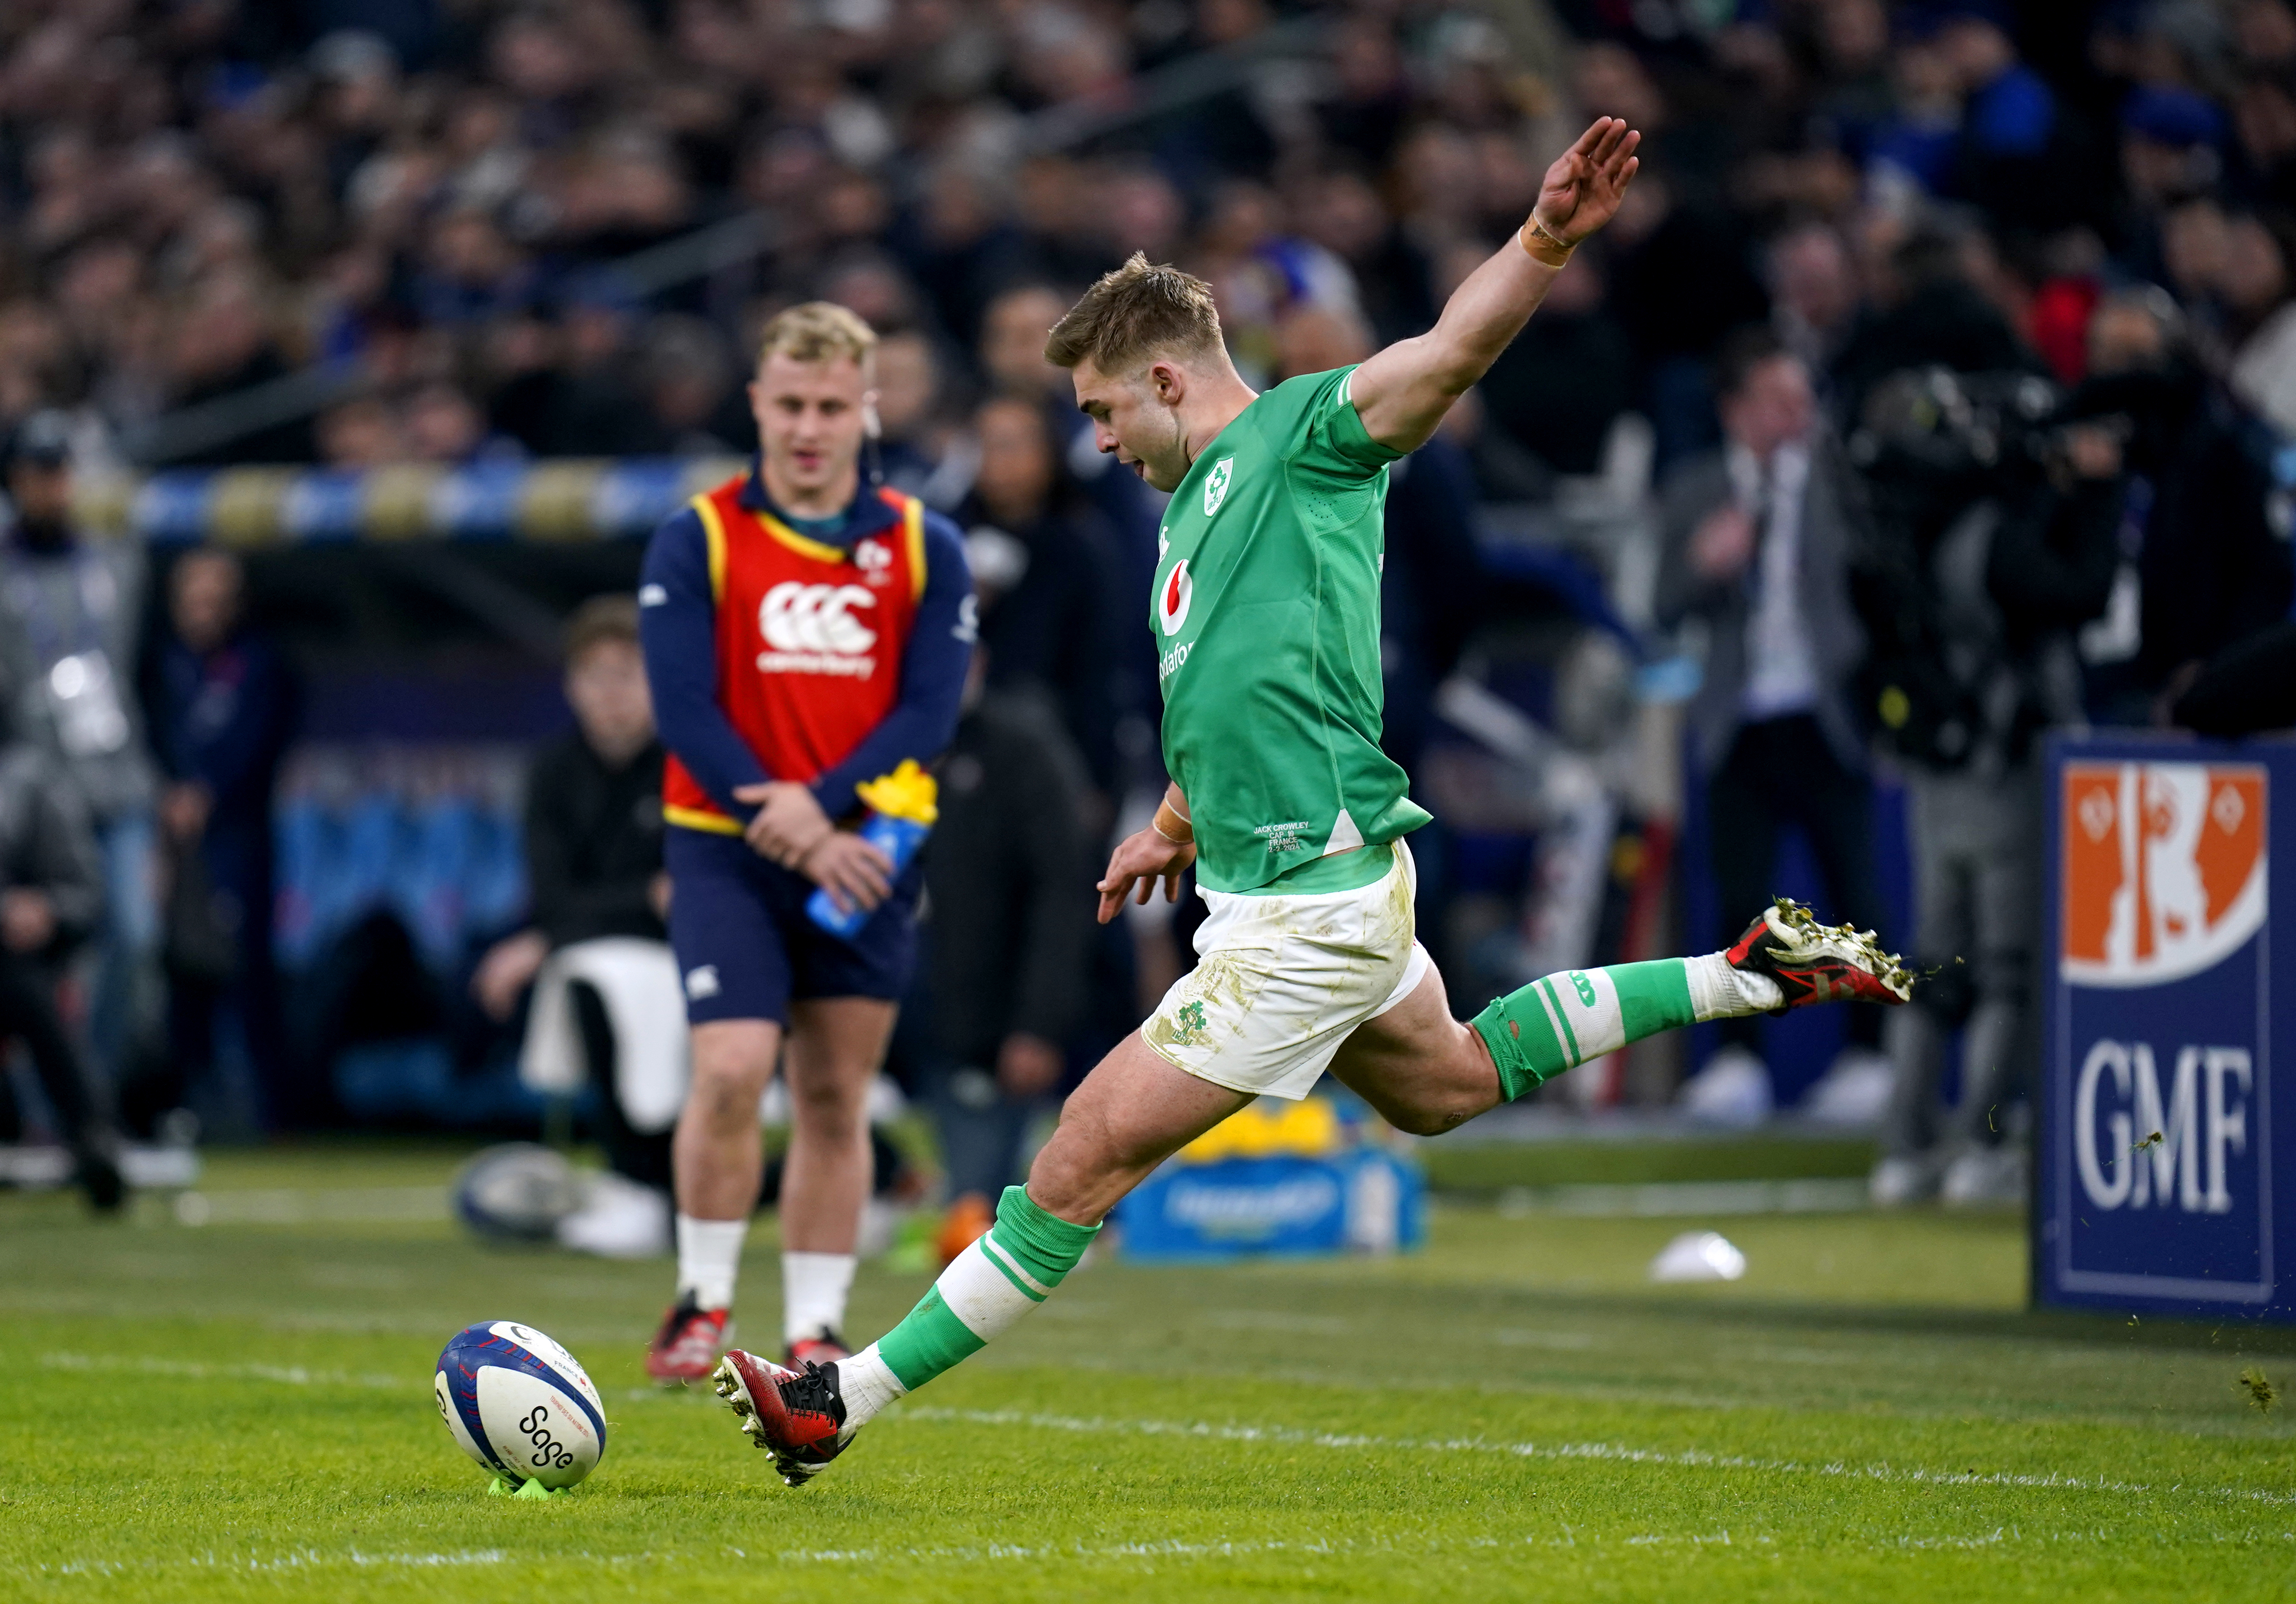 Jack Crowley kicked 13 points in Ireland's win over France